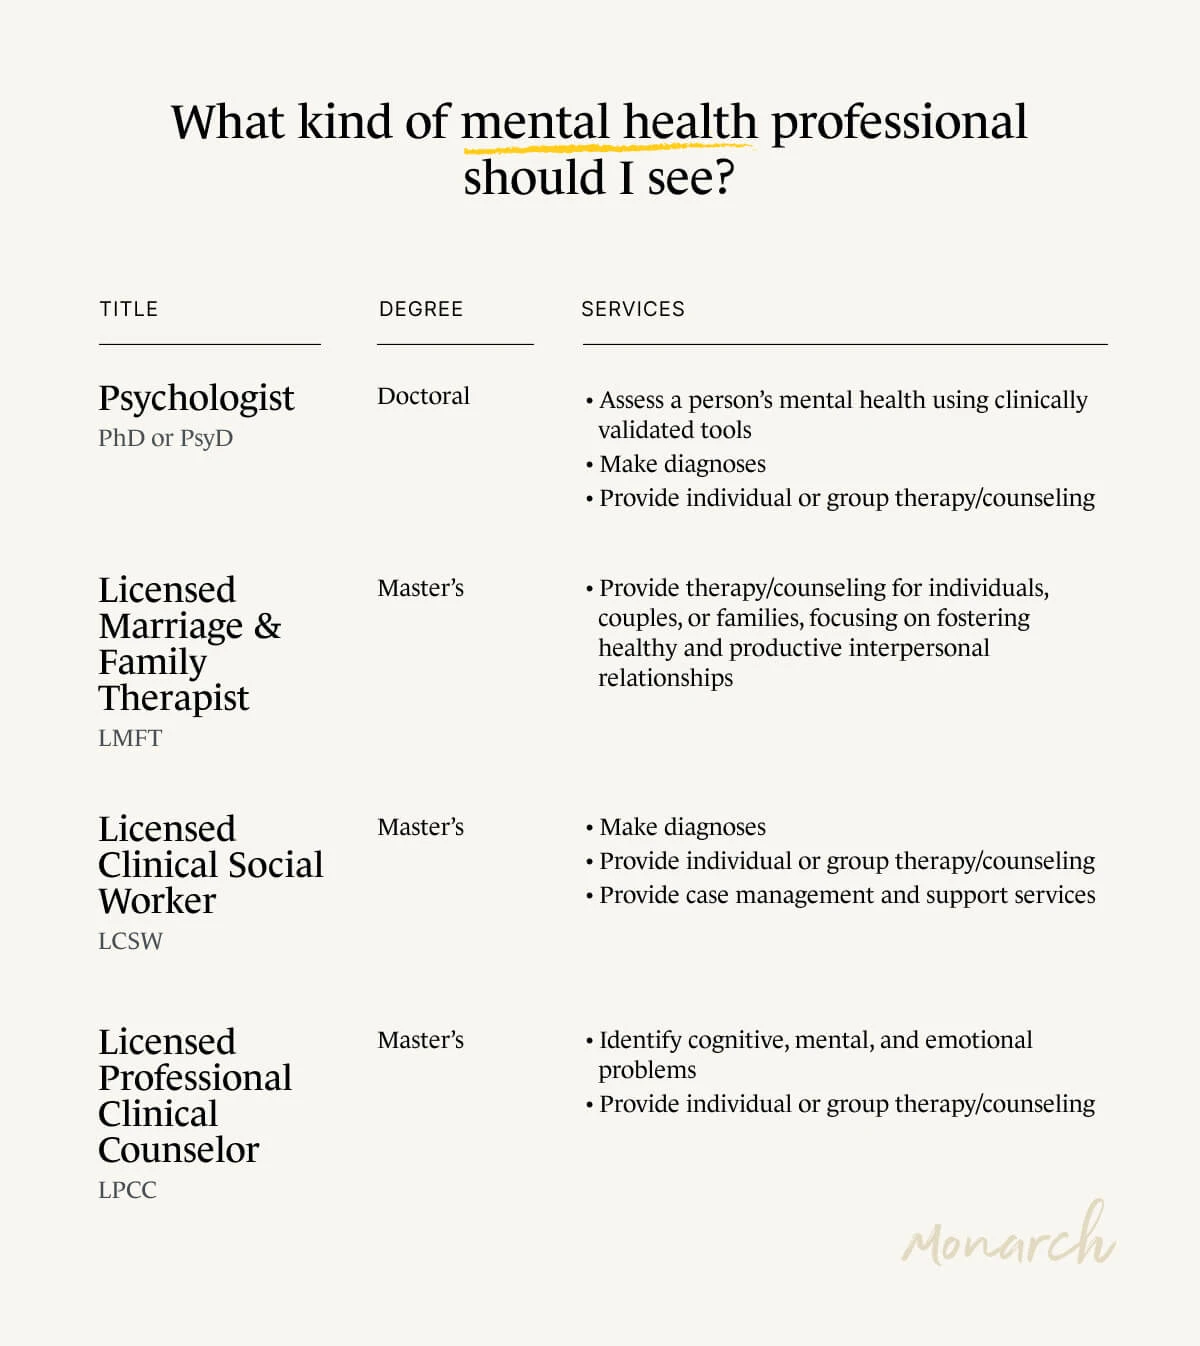 A Monarch by SimplePractice infographic describing the different kinds of mental health professionals.